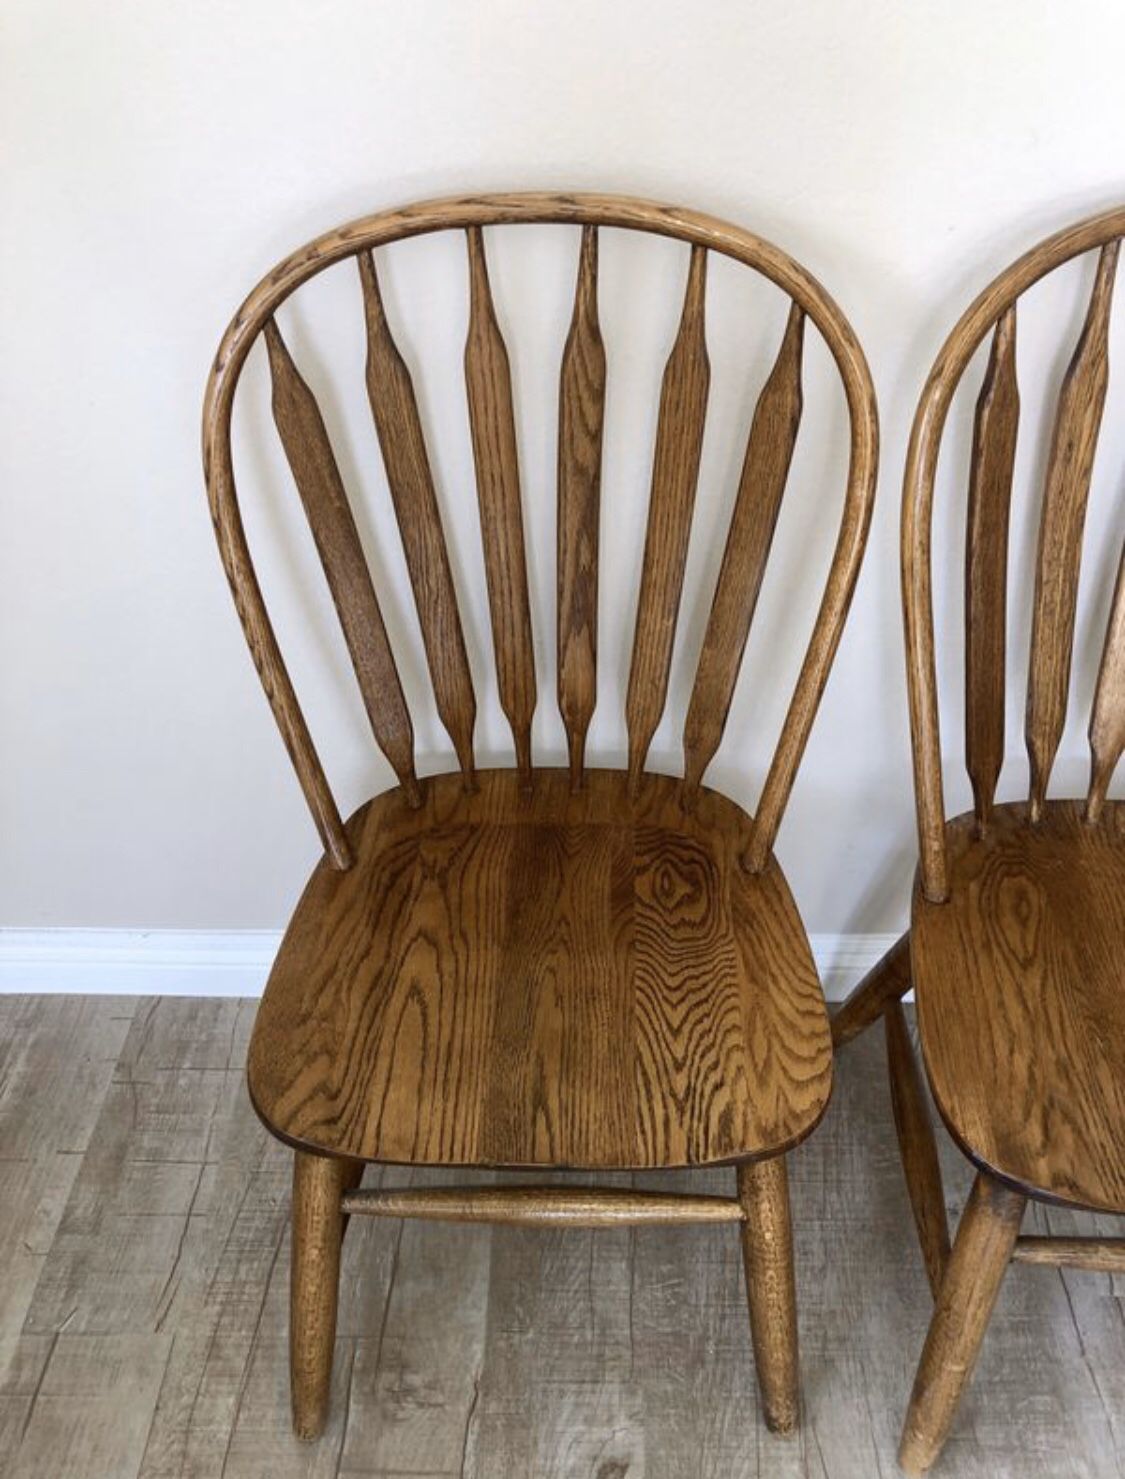 Chairs (Set of 4)